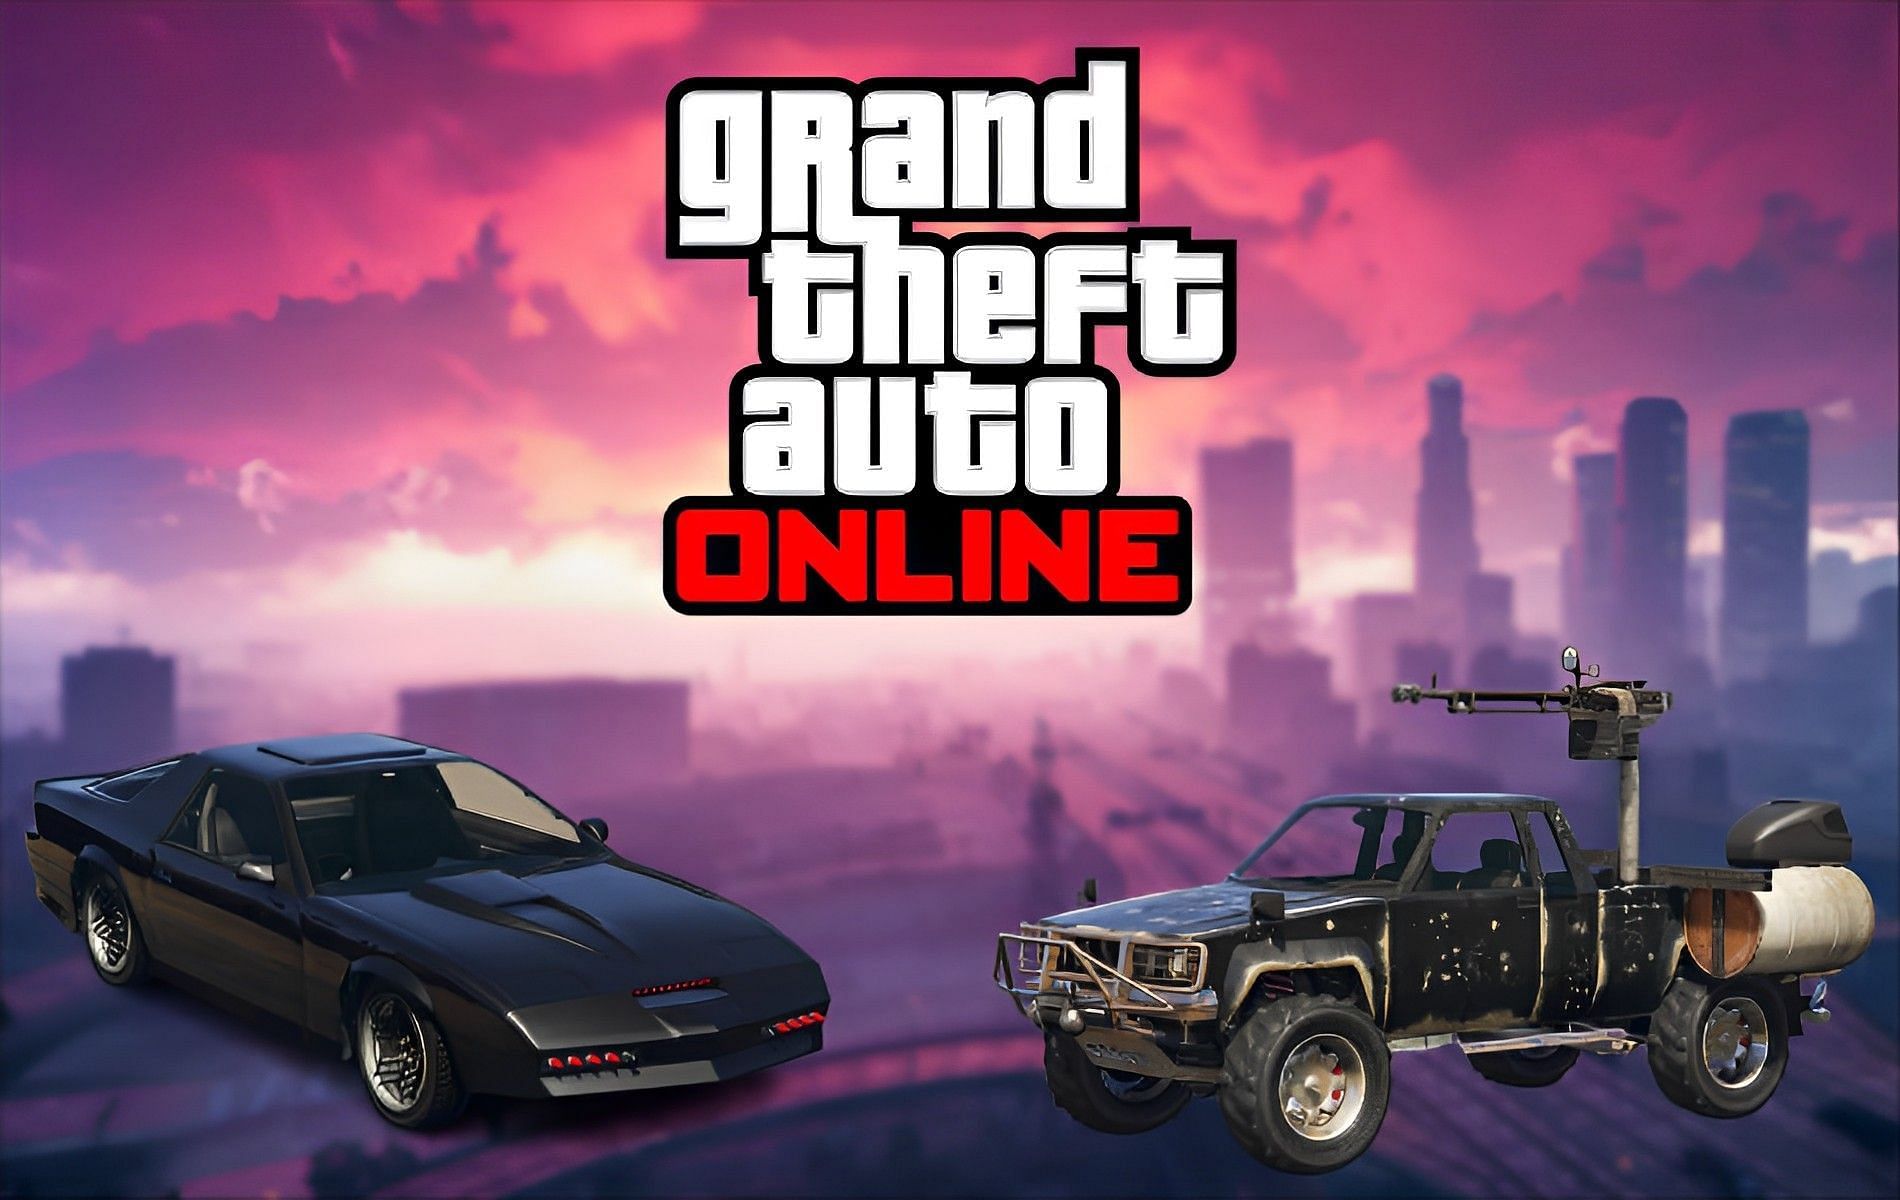 Players can earn 2x GTA$ and RP this week by completing Special Vehicle Work. (Image via YouTube/Tylarious)